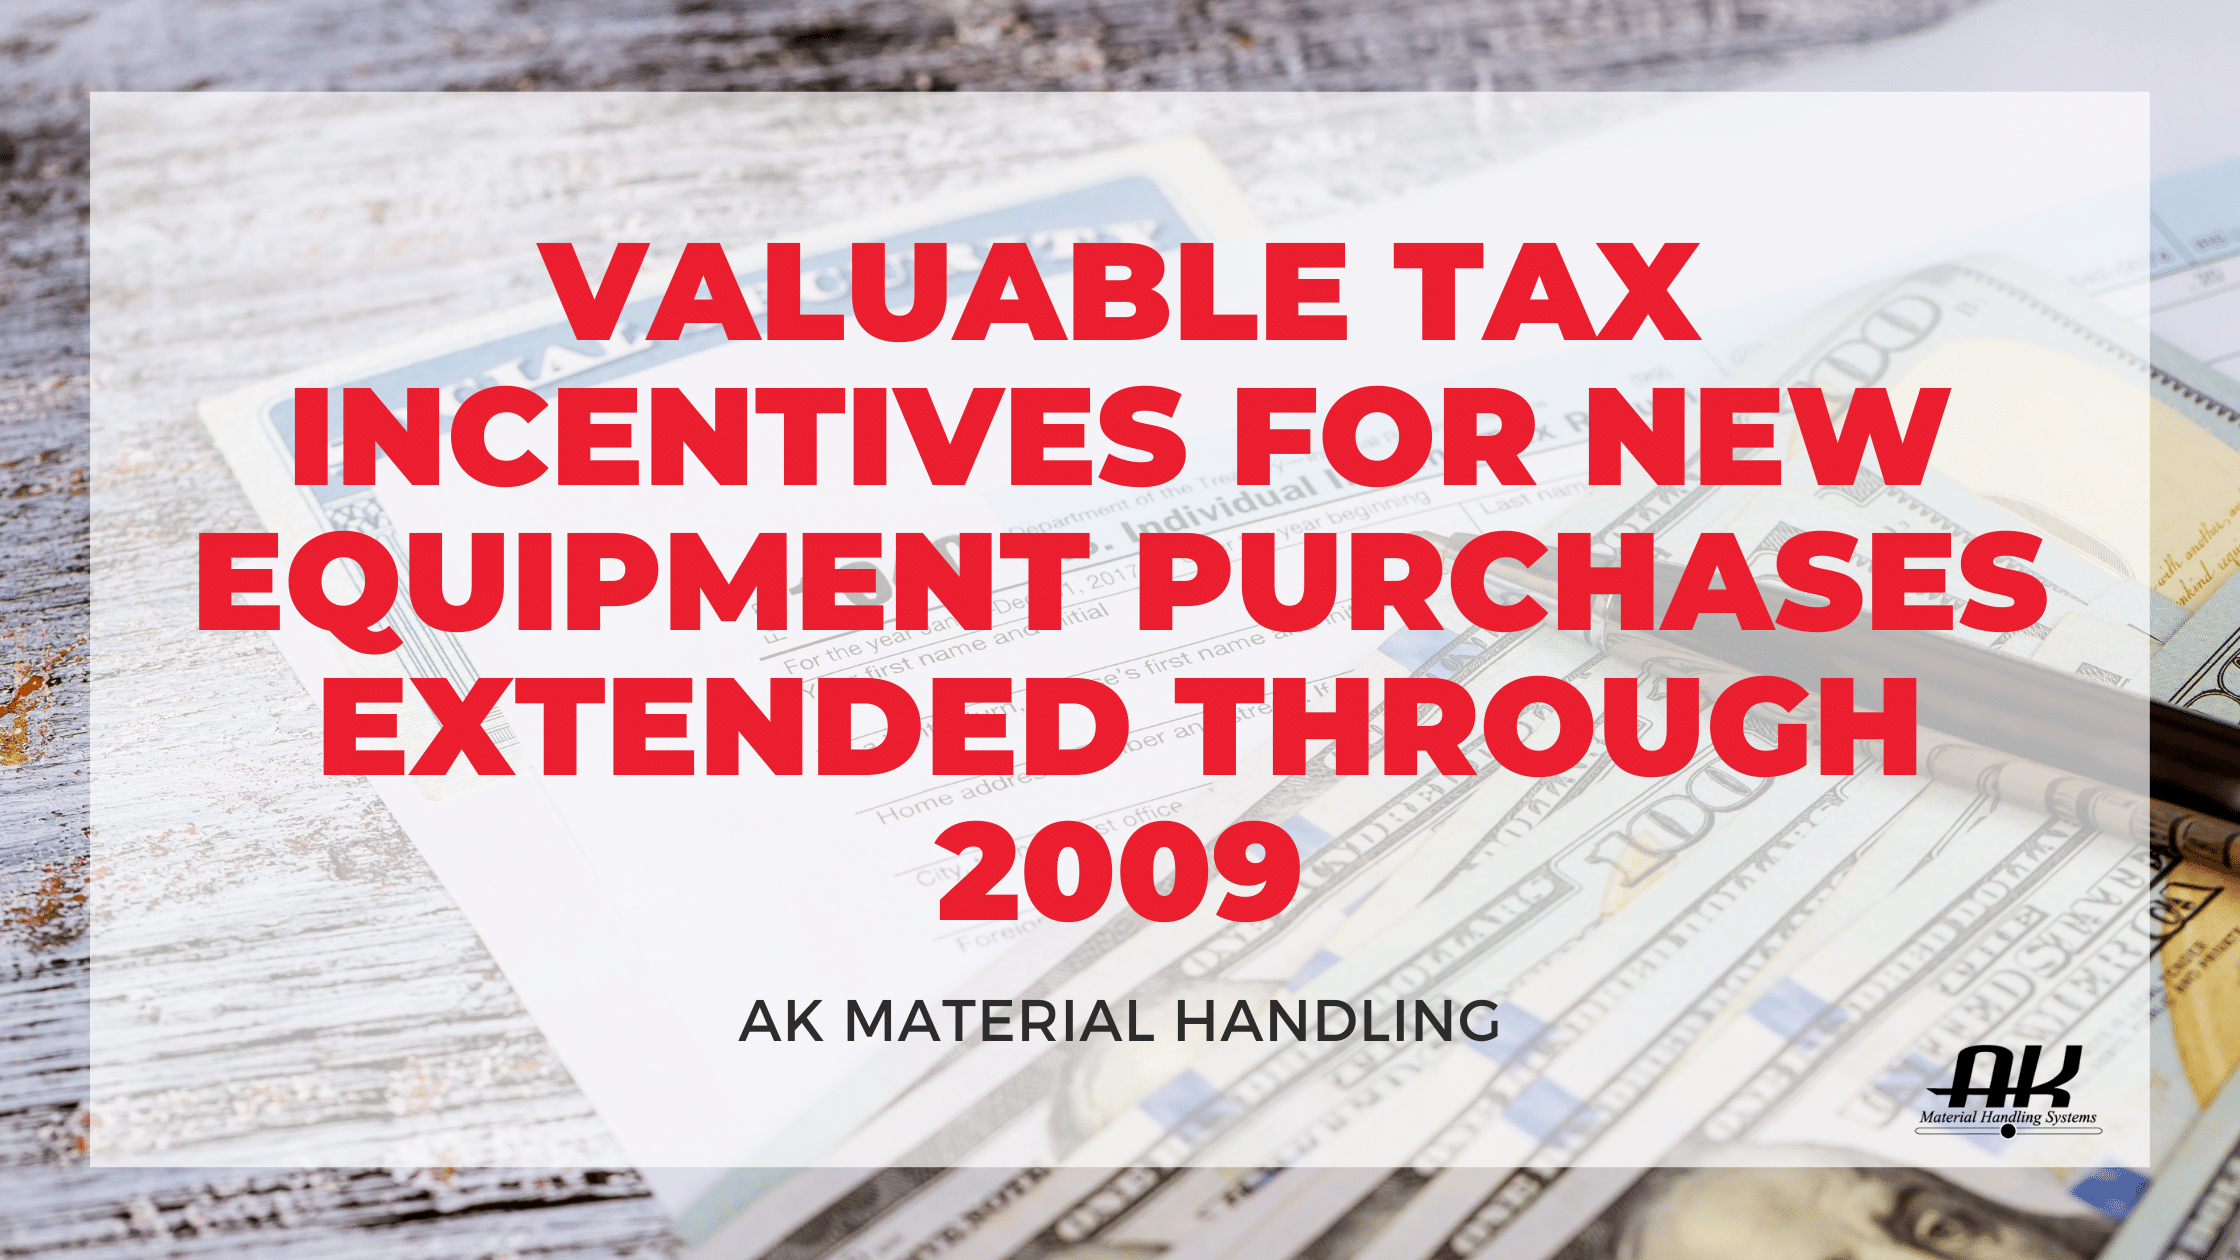 Valuable tax incentives for new equipment purchases extend through 2009.